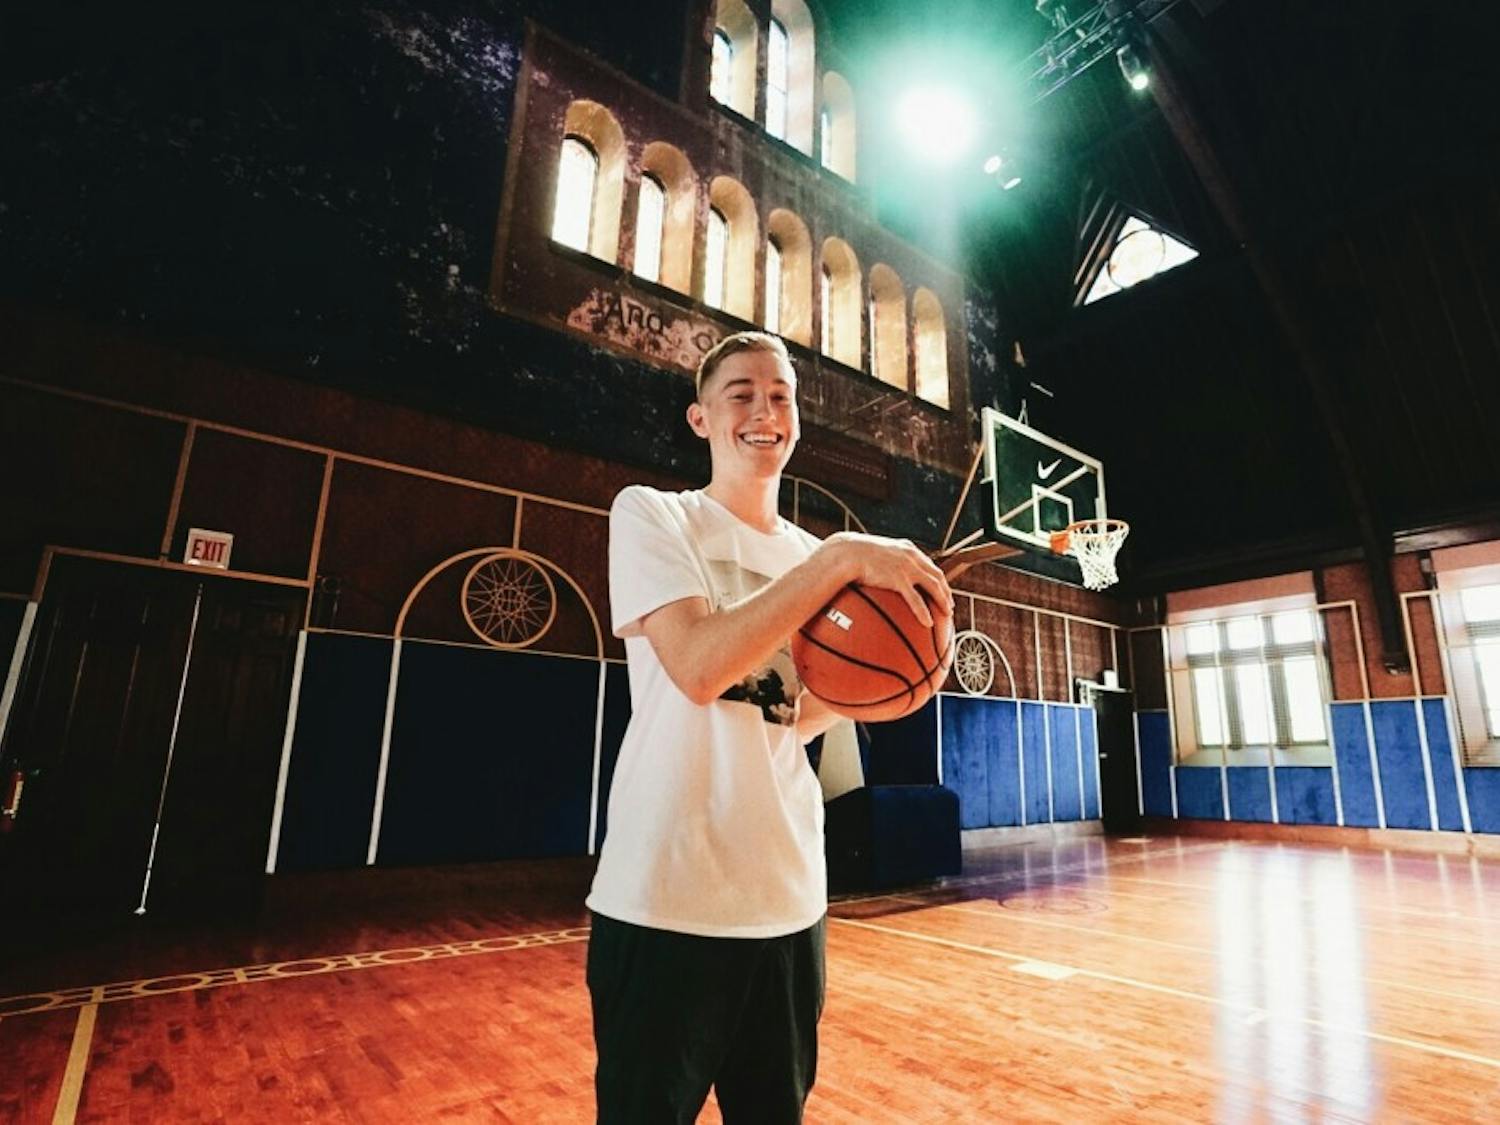 Senior Matthew Fedder worked for Nike as a brand intern in Chicago during the summer of 2018. The training center shown was converted from a church.